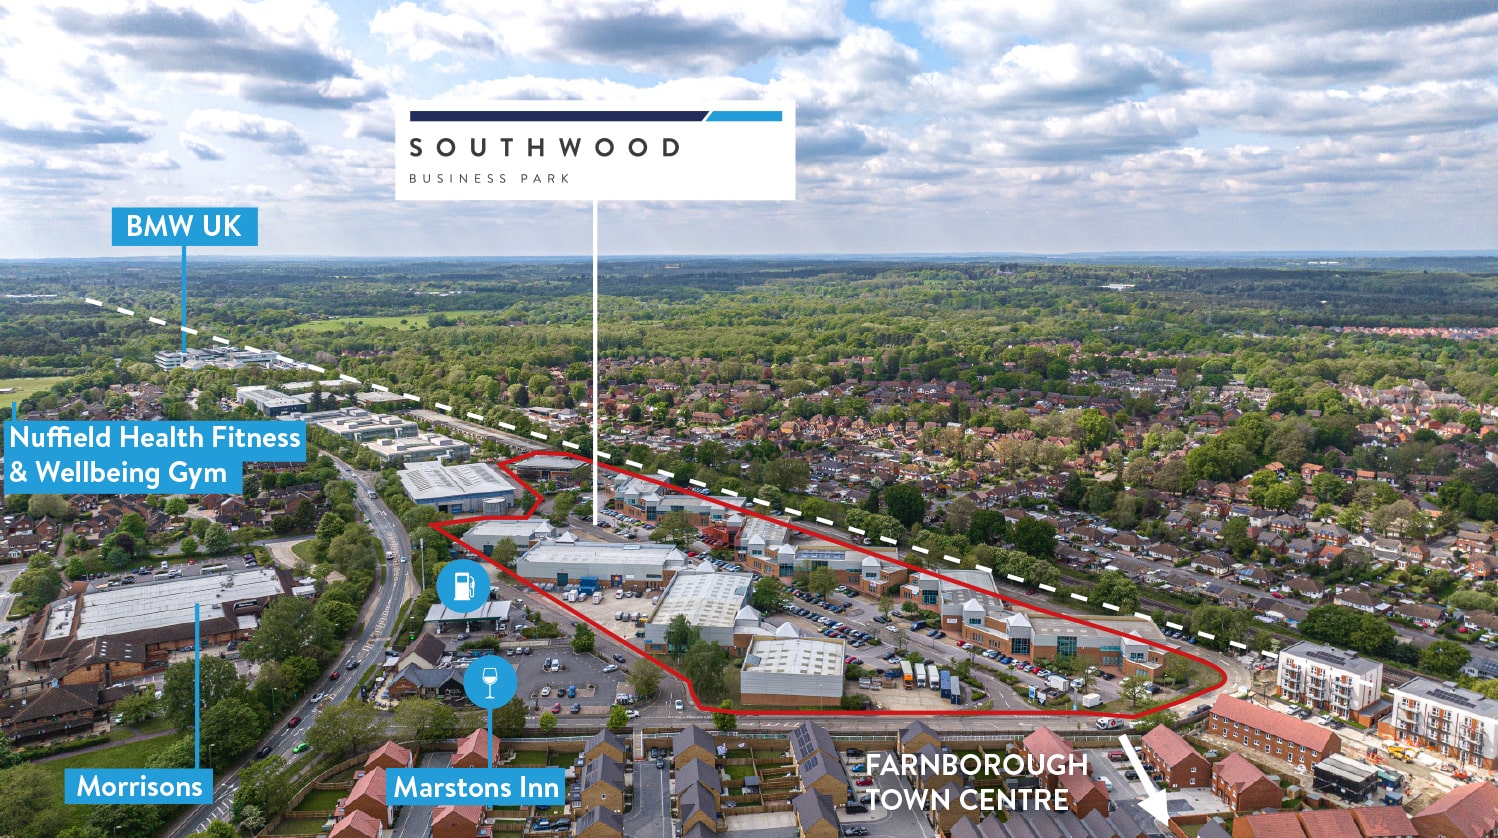 An aerial photograph of Southwood Business Park's location